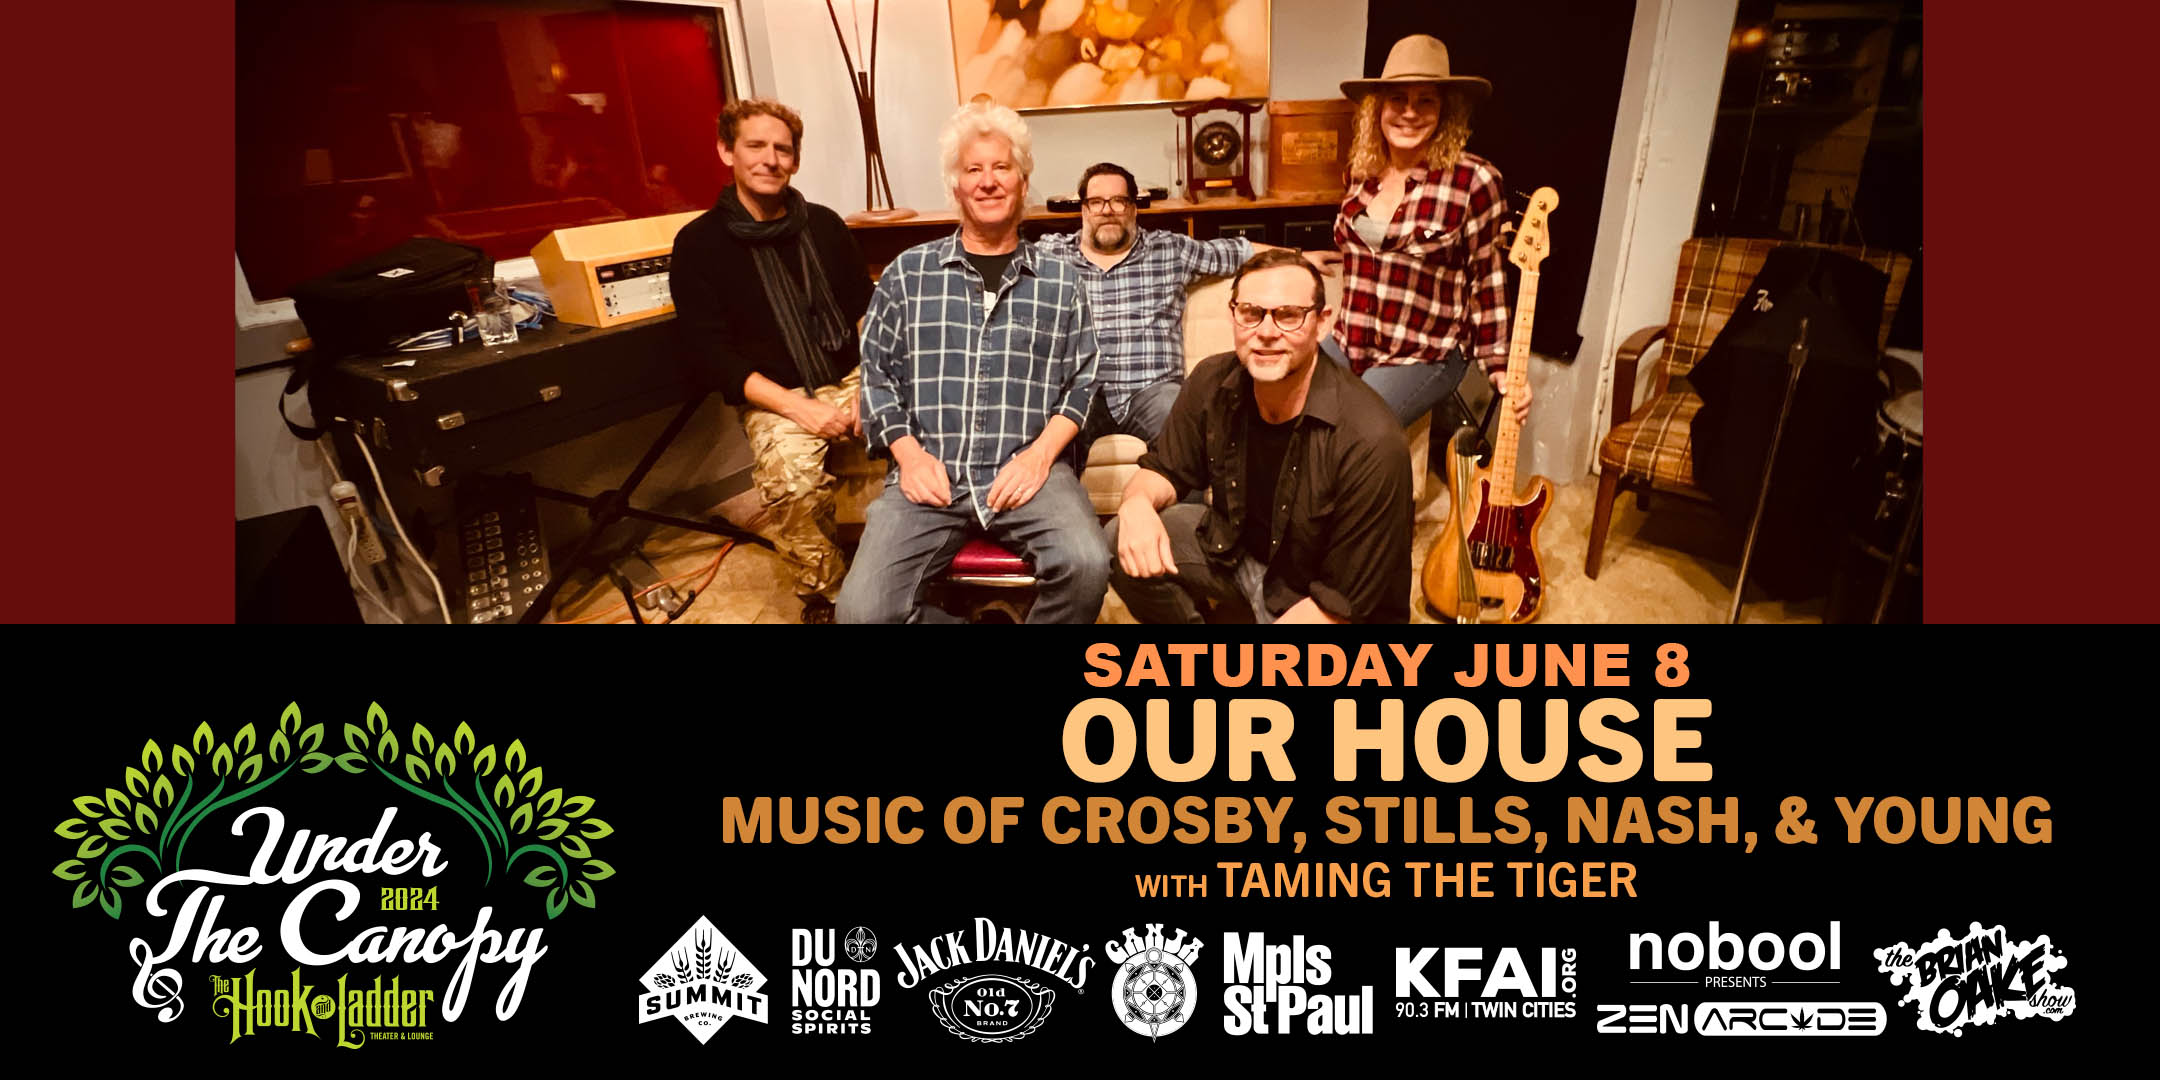 Our House: The Music Of Crosby, Stills, Nash & Young with guest Taming The Tiger Saturday, June 8, 2024 Under The Canopy at The Hook and Ladder Theater "An Urban Outdoor Summer Concert Series" Doors 6:00pm :: Music 7:00pm :: 21+ Reserved Seats: $40 GA: $25 ADV / $30 DOS